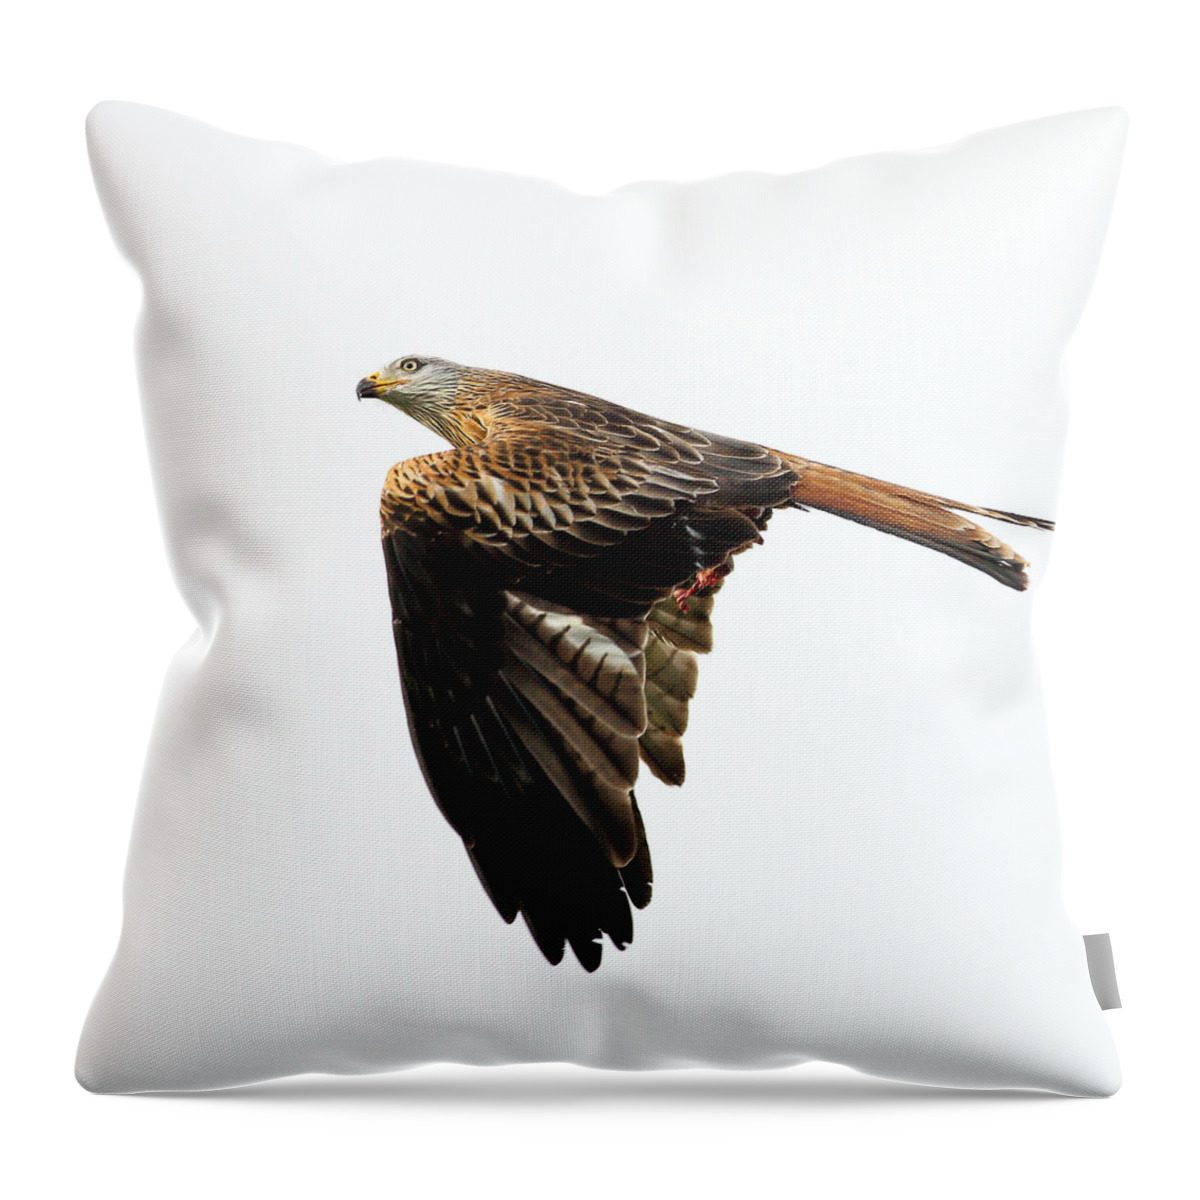  Accipitridae Throw Pillow featuring the photograph Bird of prey in flight by Grant Glendinning